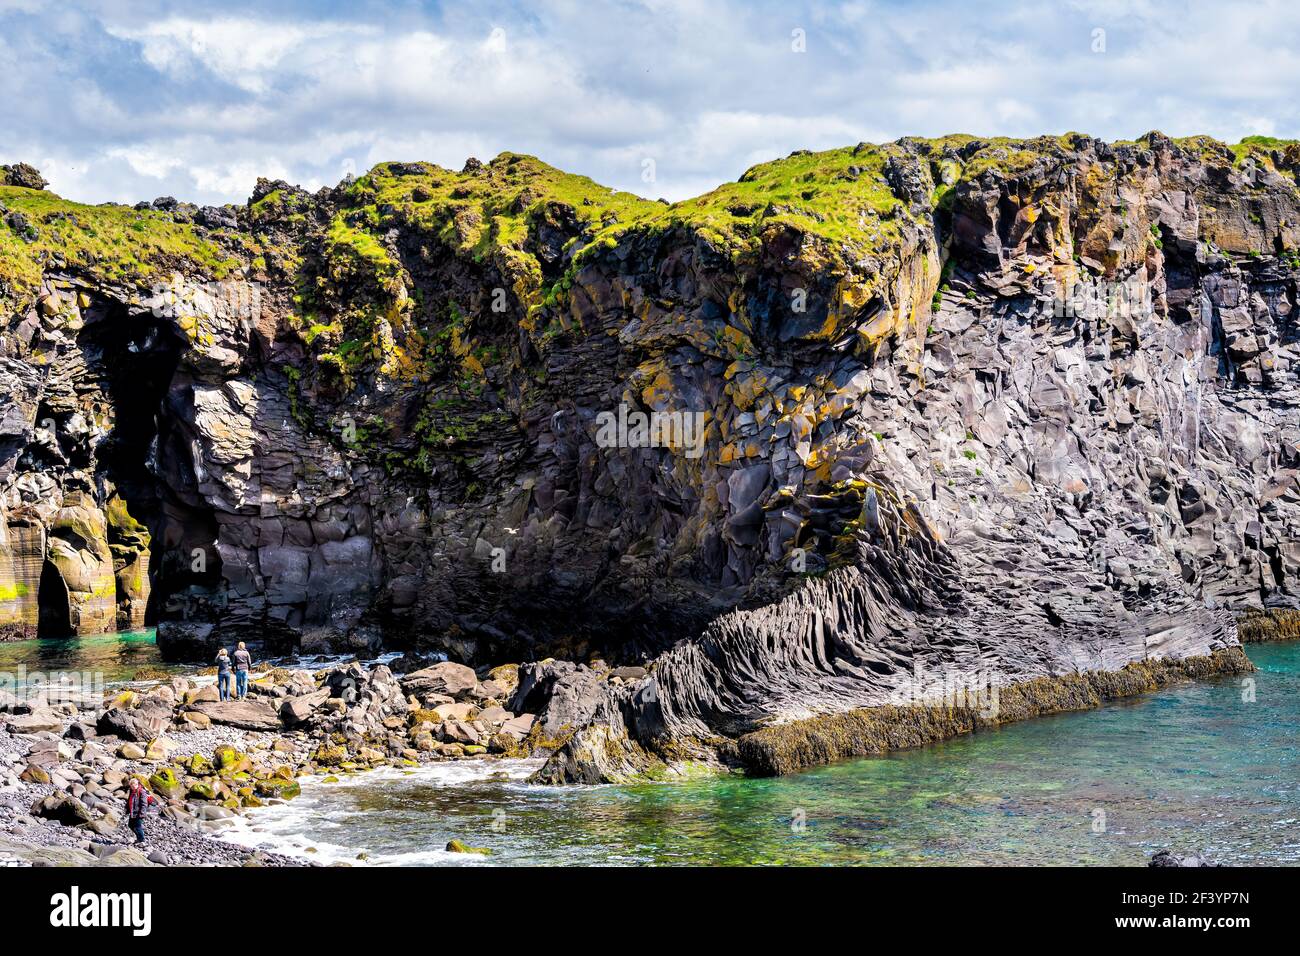 Snaefellsjokull, Iceland - June 18, 2018: View of rocky formation in Hellnar National park Snaefellsnes Peninsula with ocean and cave cove people tour Stock Photo